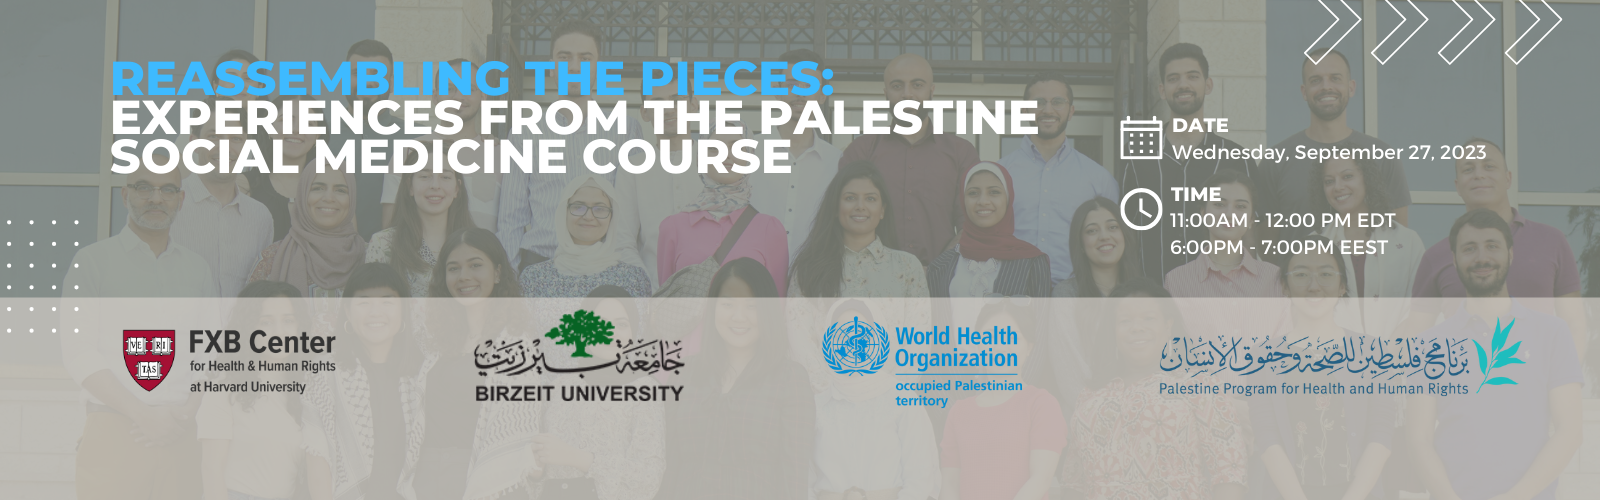 Reassembling the Pieces: Experiences from the Palestine Social Medicine Course